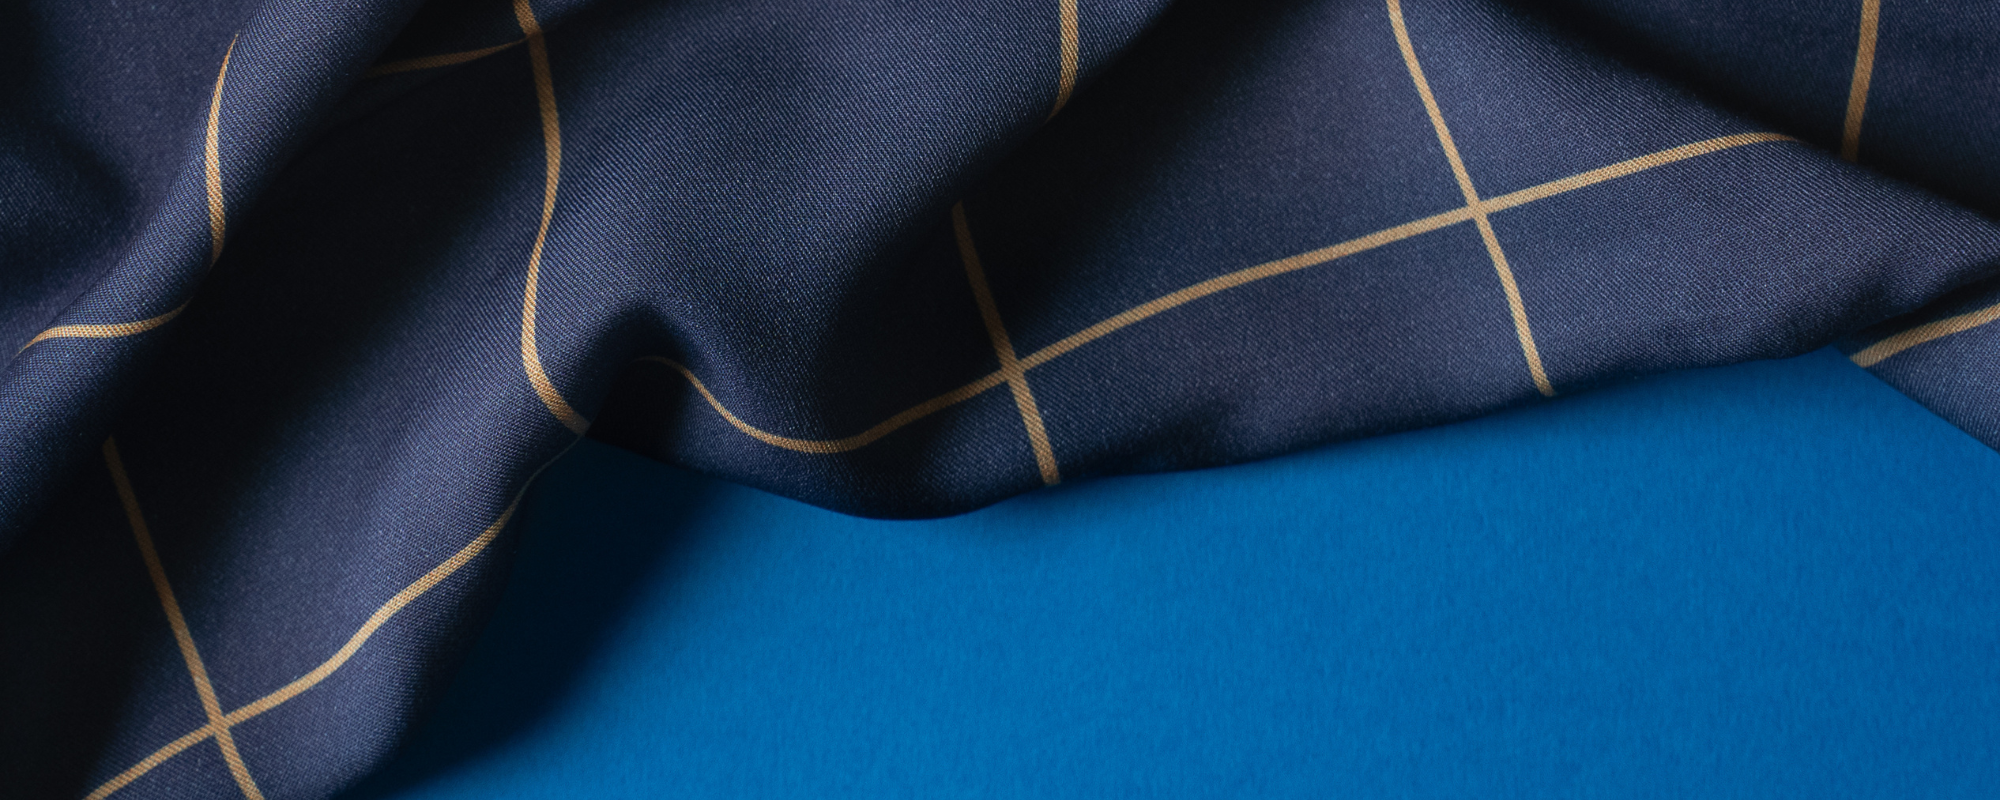 Go Green with Our Collection of Sustainable Fabrics